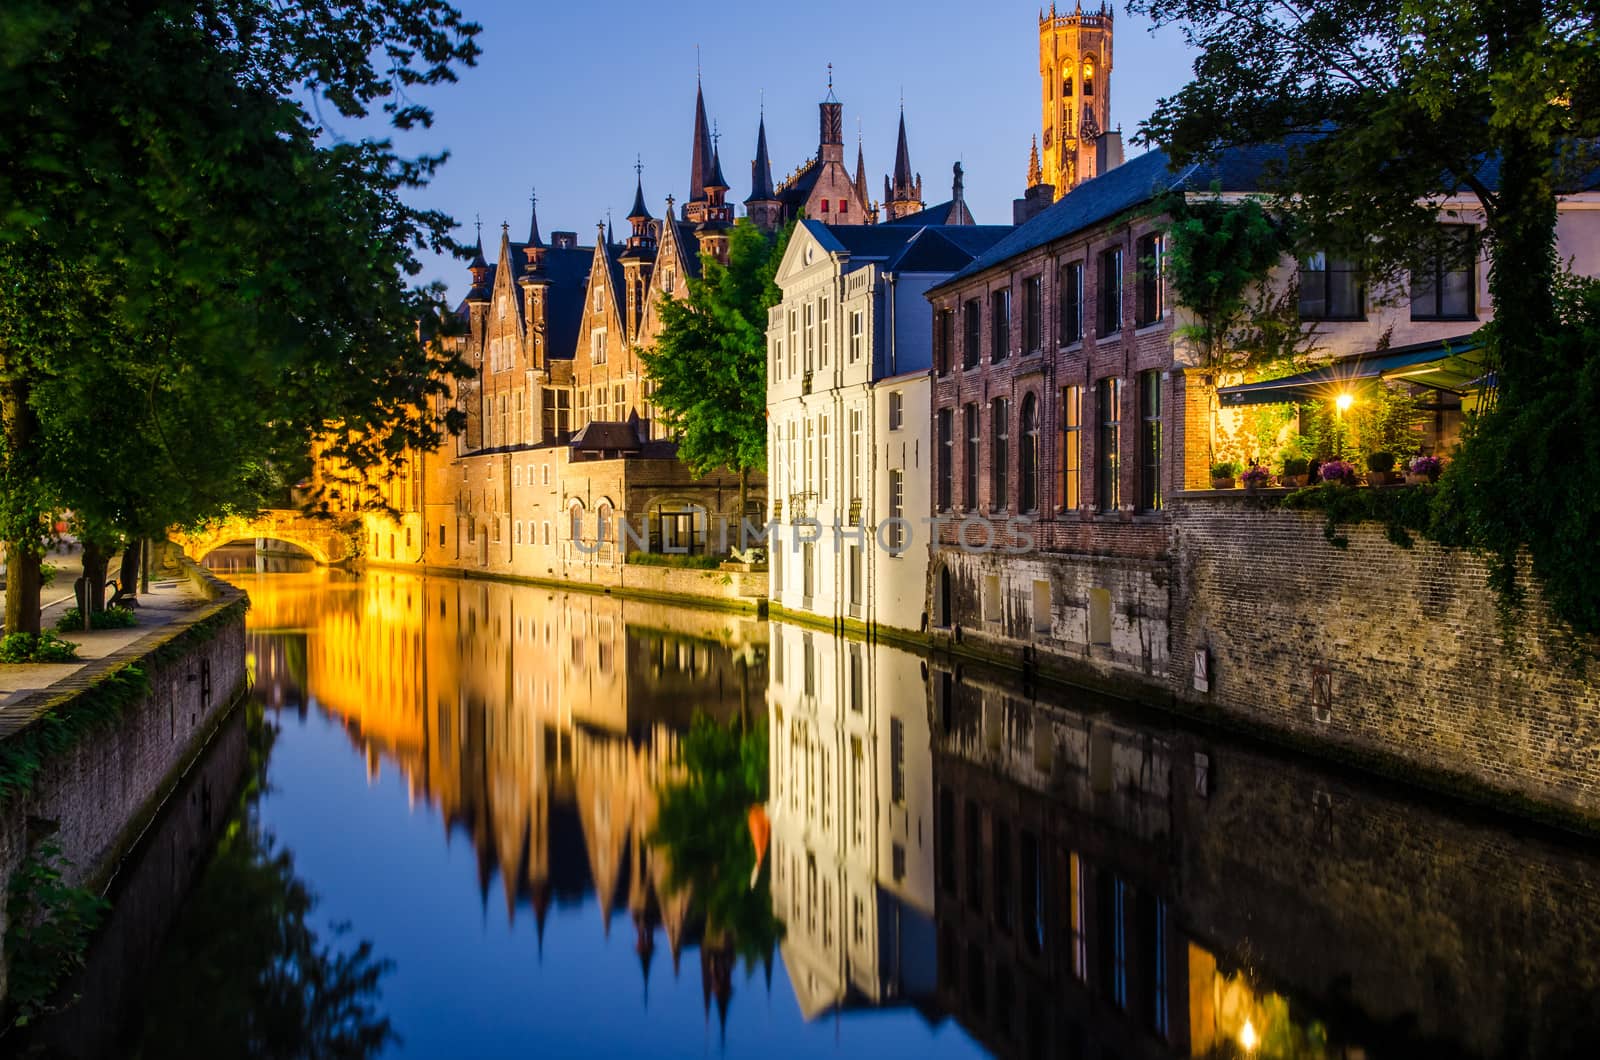 Water canal, medieval houses and bell tower at night, Bruges